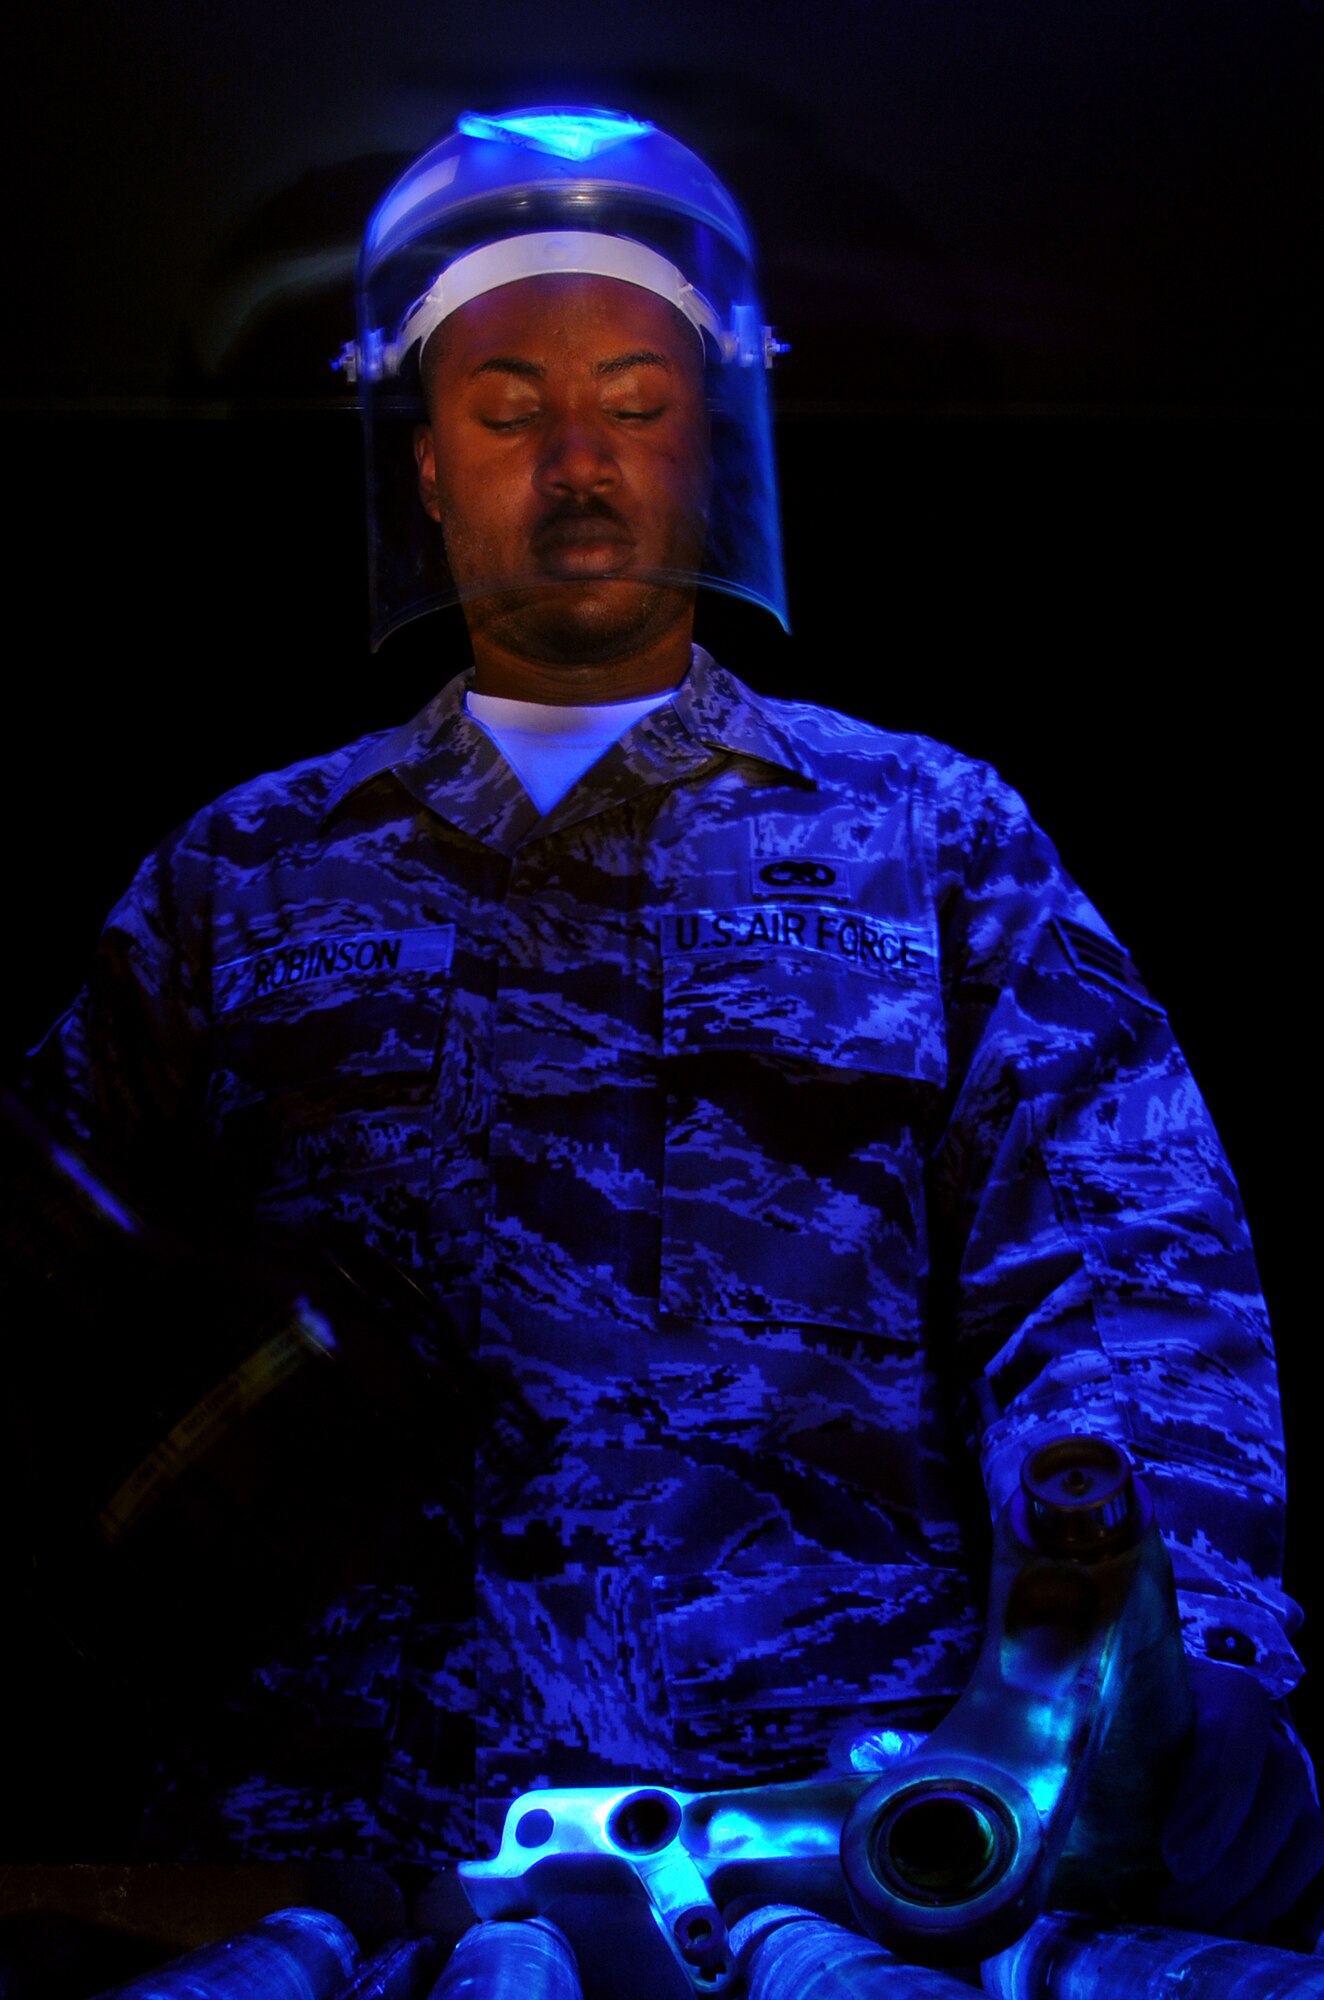 Senior Airman Joshua Robinson, 48th Equipment Maintenance Squadron Non-Destruction Inspection journeyman, inspects a component for cracks after it?s been dipped in fluorescent chemicals, which light up under black light. The process has been designed to allow Airman Robinson to find cracks and other defects in the various components he inspects, without damaging them. (U.S. Air Force photo by Staff Sgt. Nathan Gallahan)